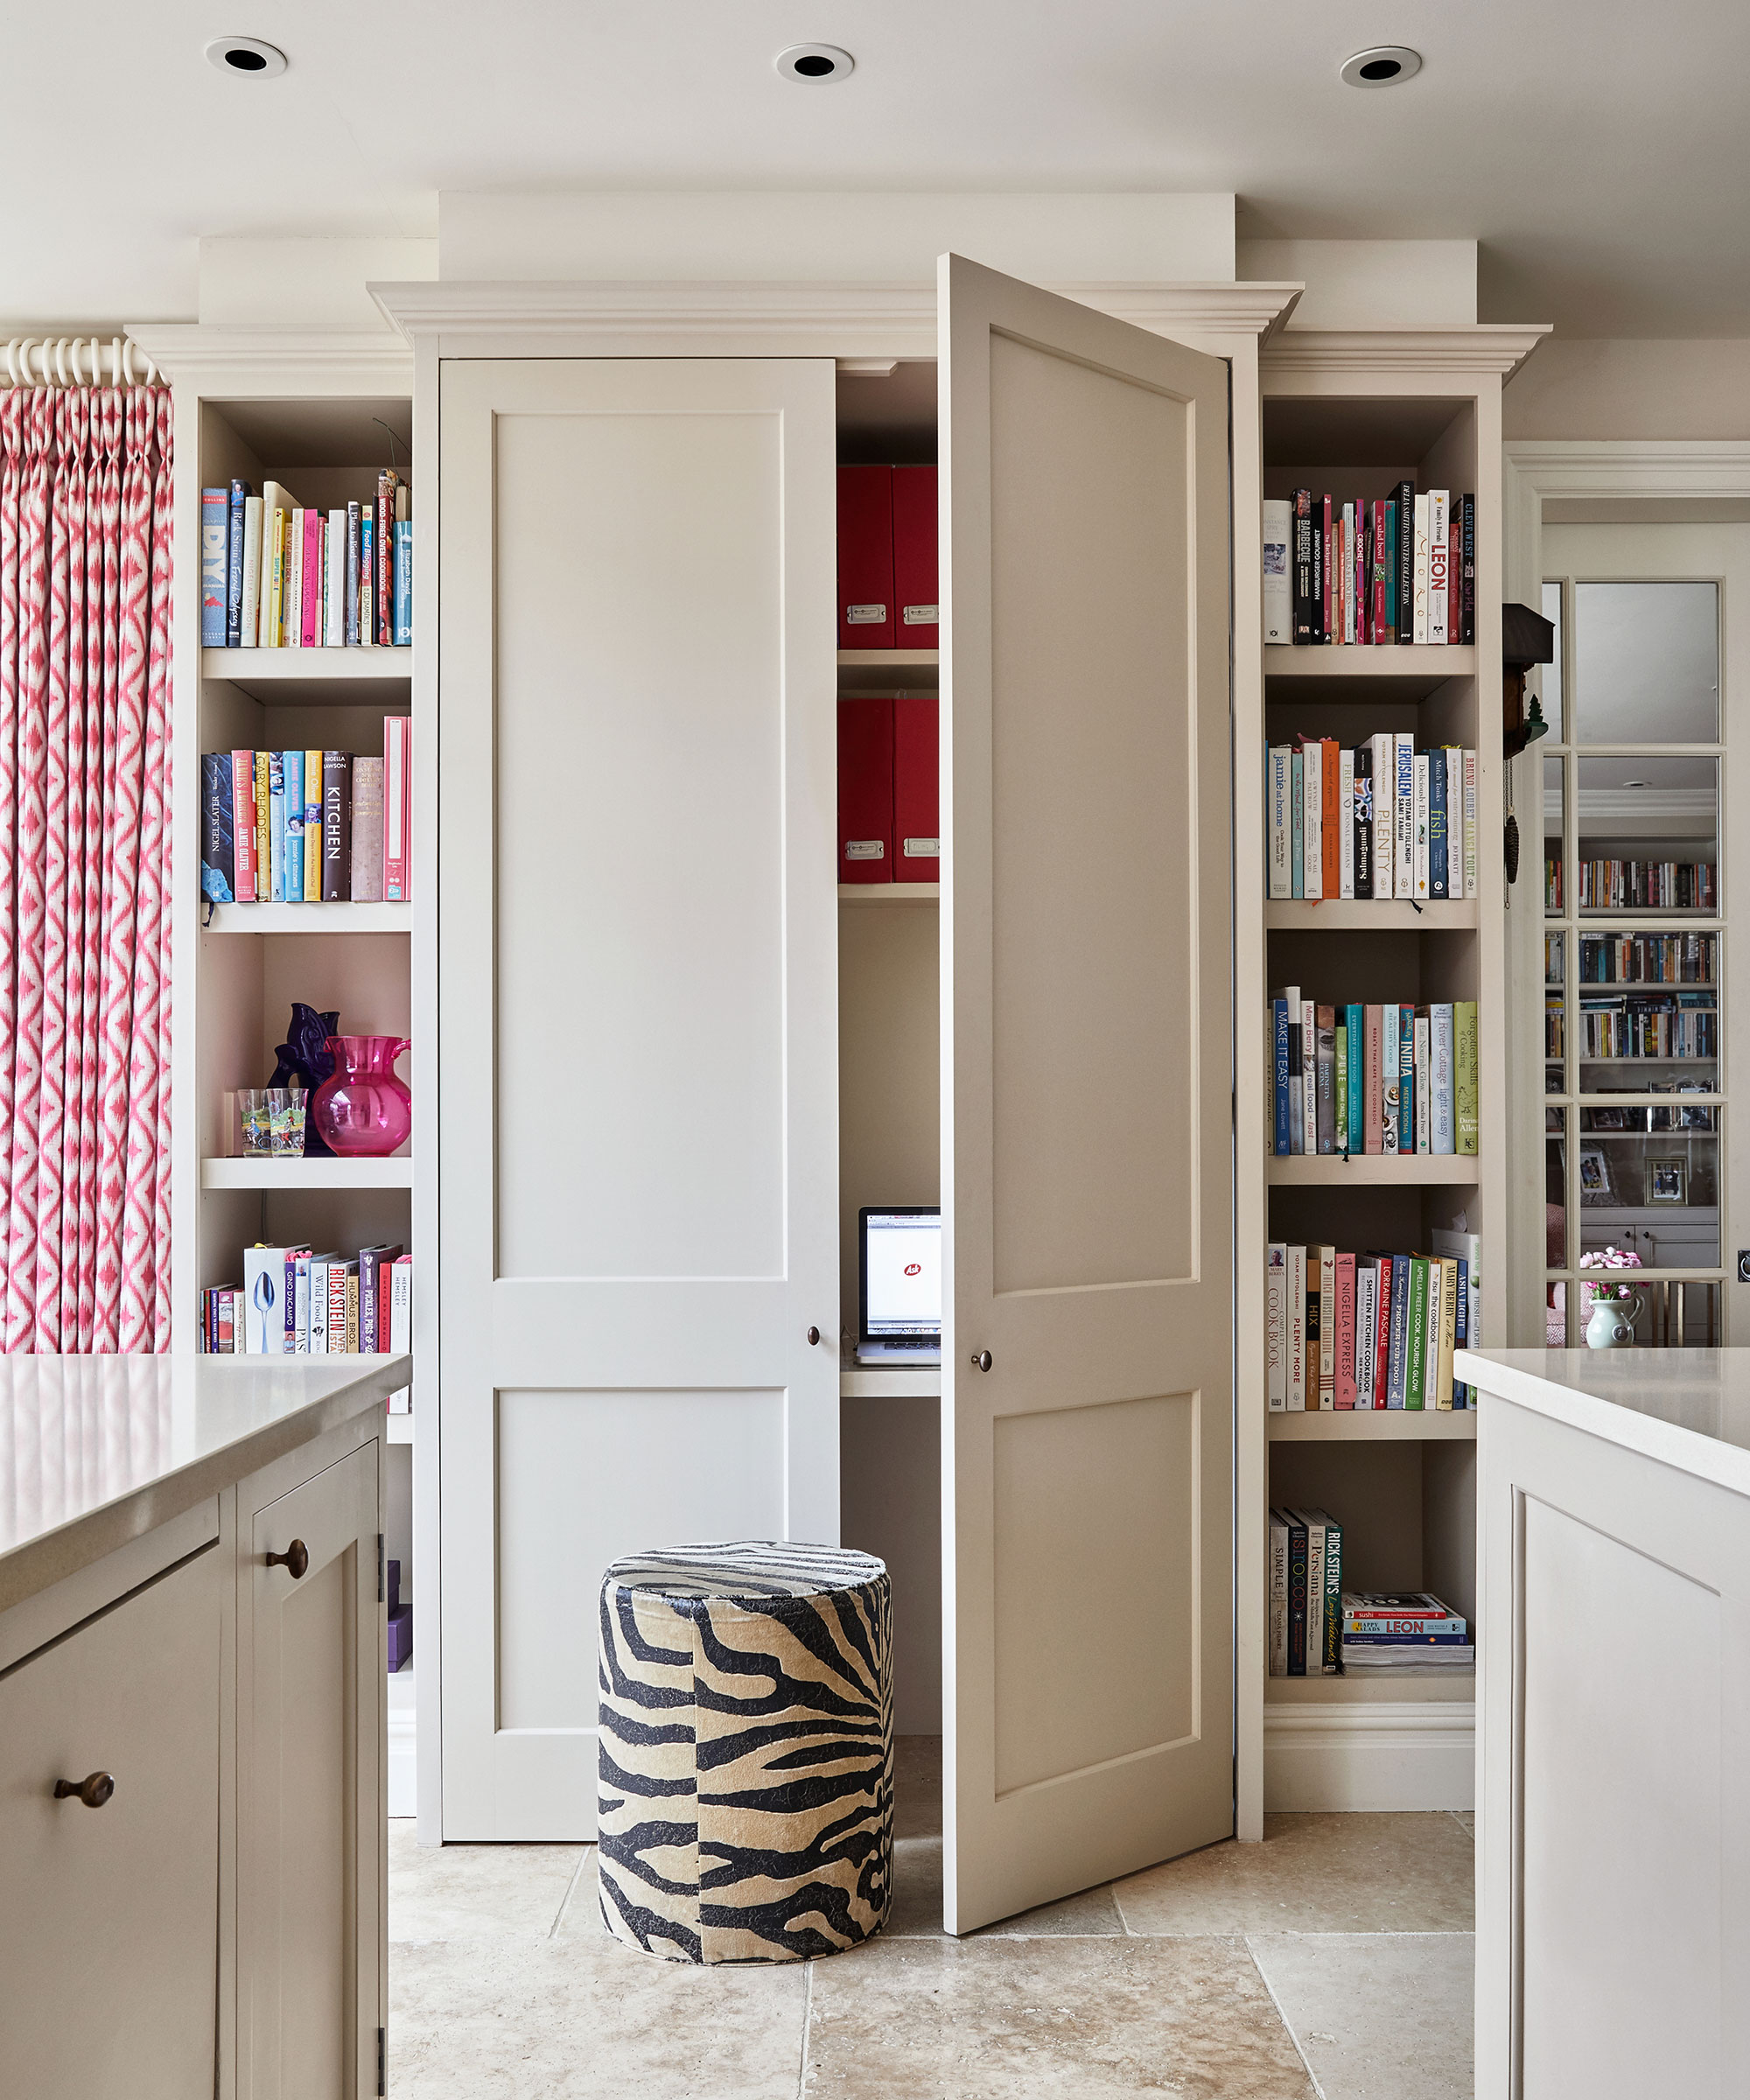 Bespoke built-in storage in neutral hues offering desk space and bookshelves.